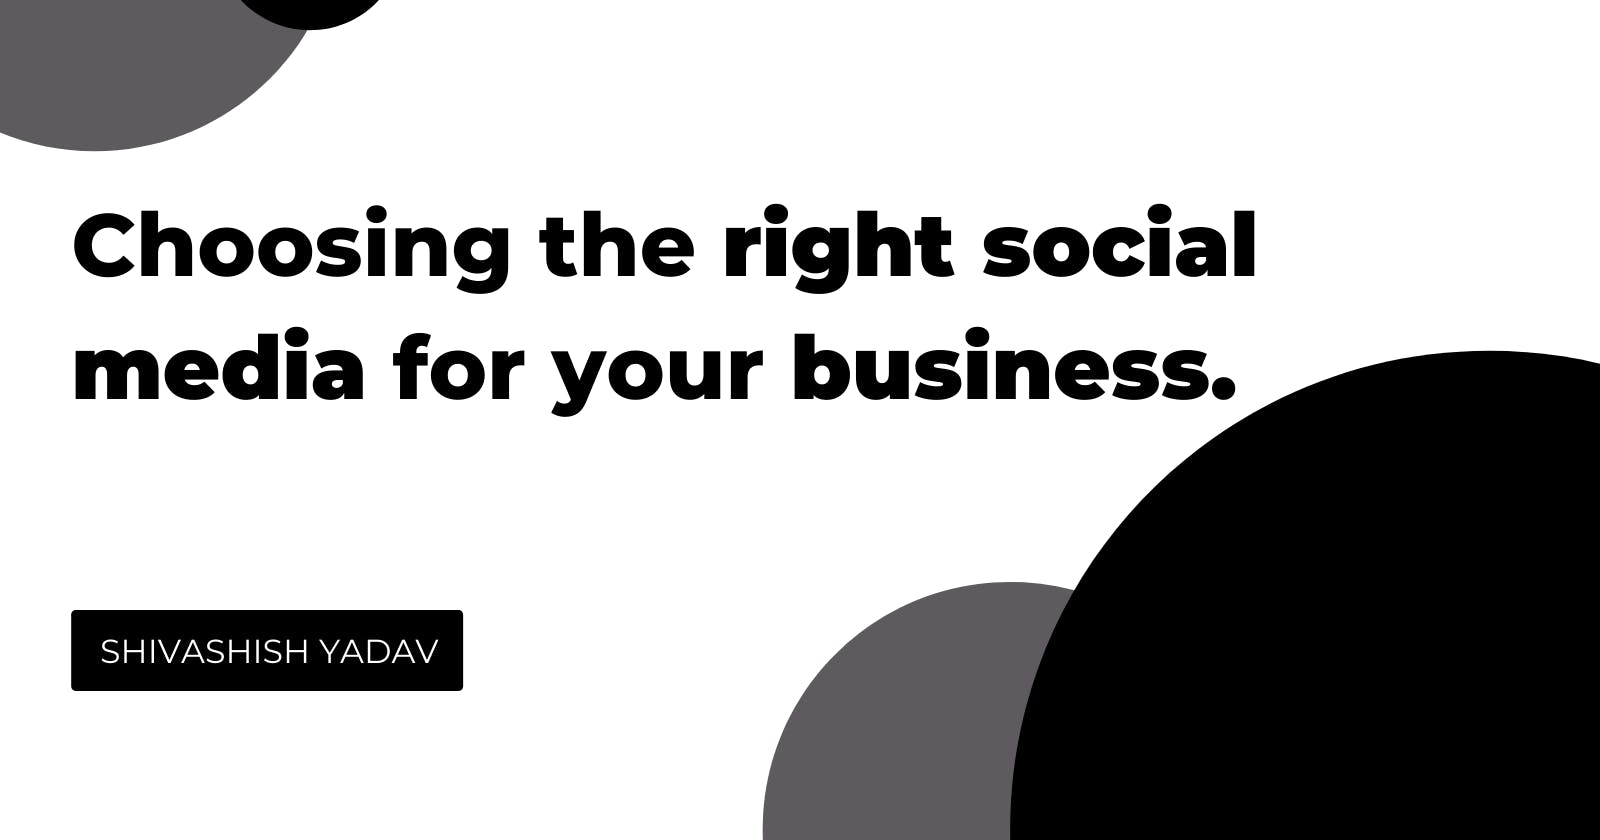 What should consider before choosing the right social media for your business.